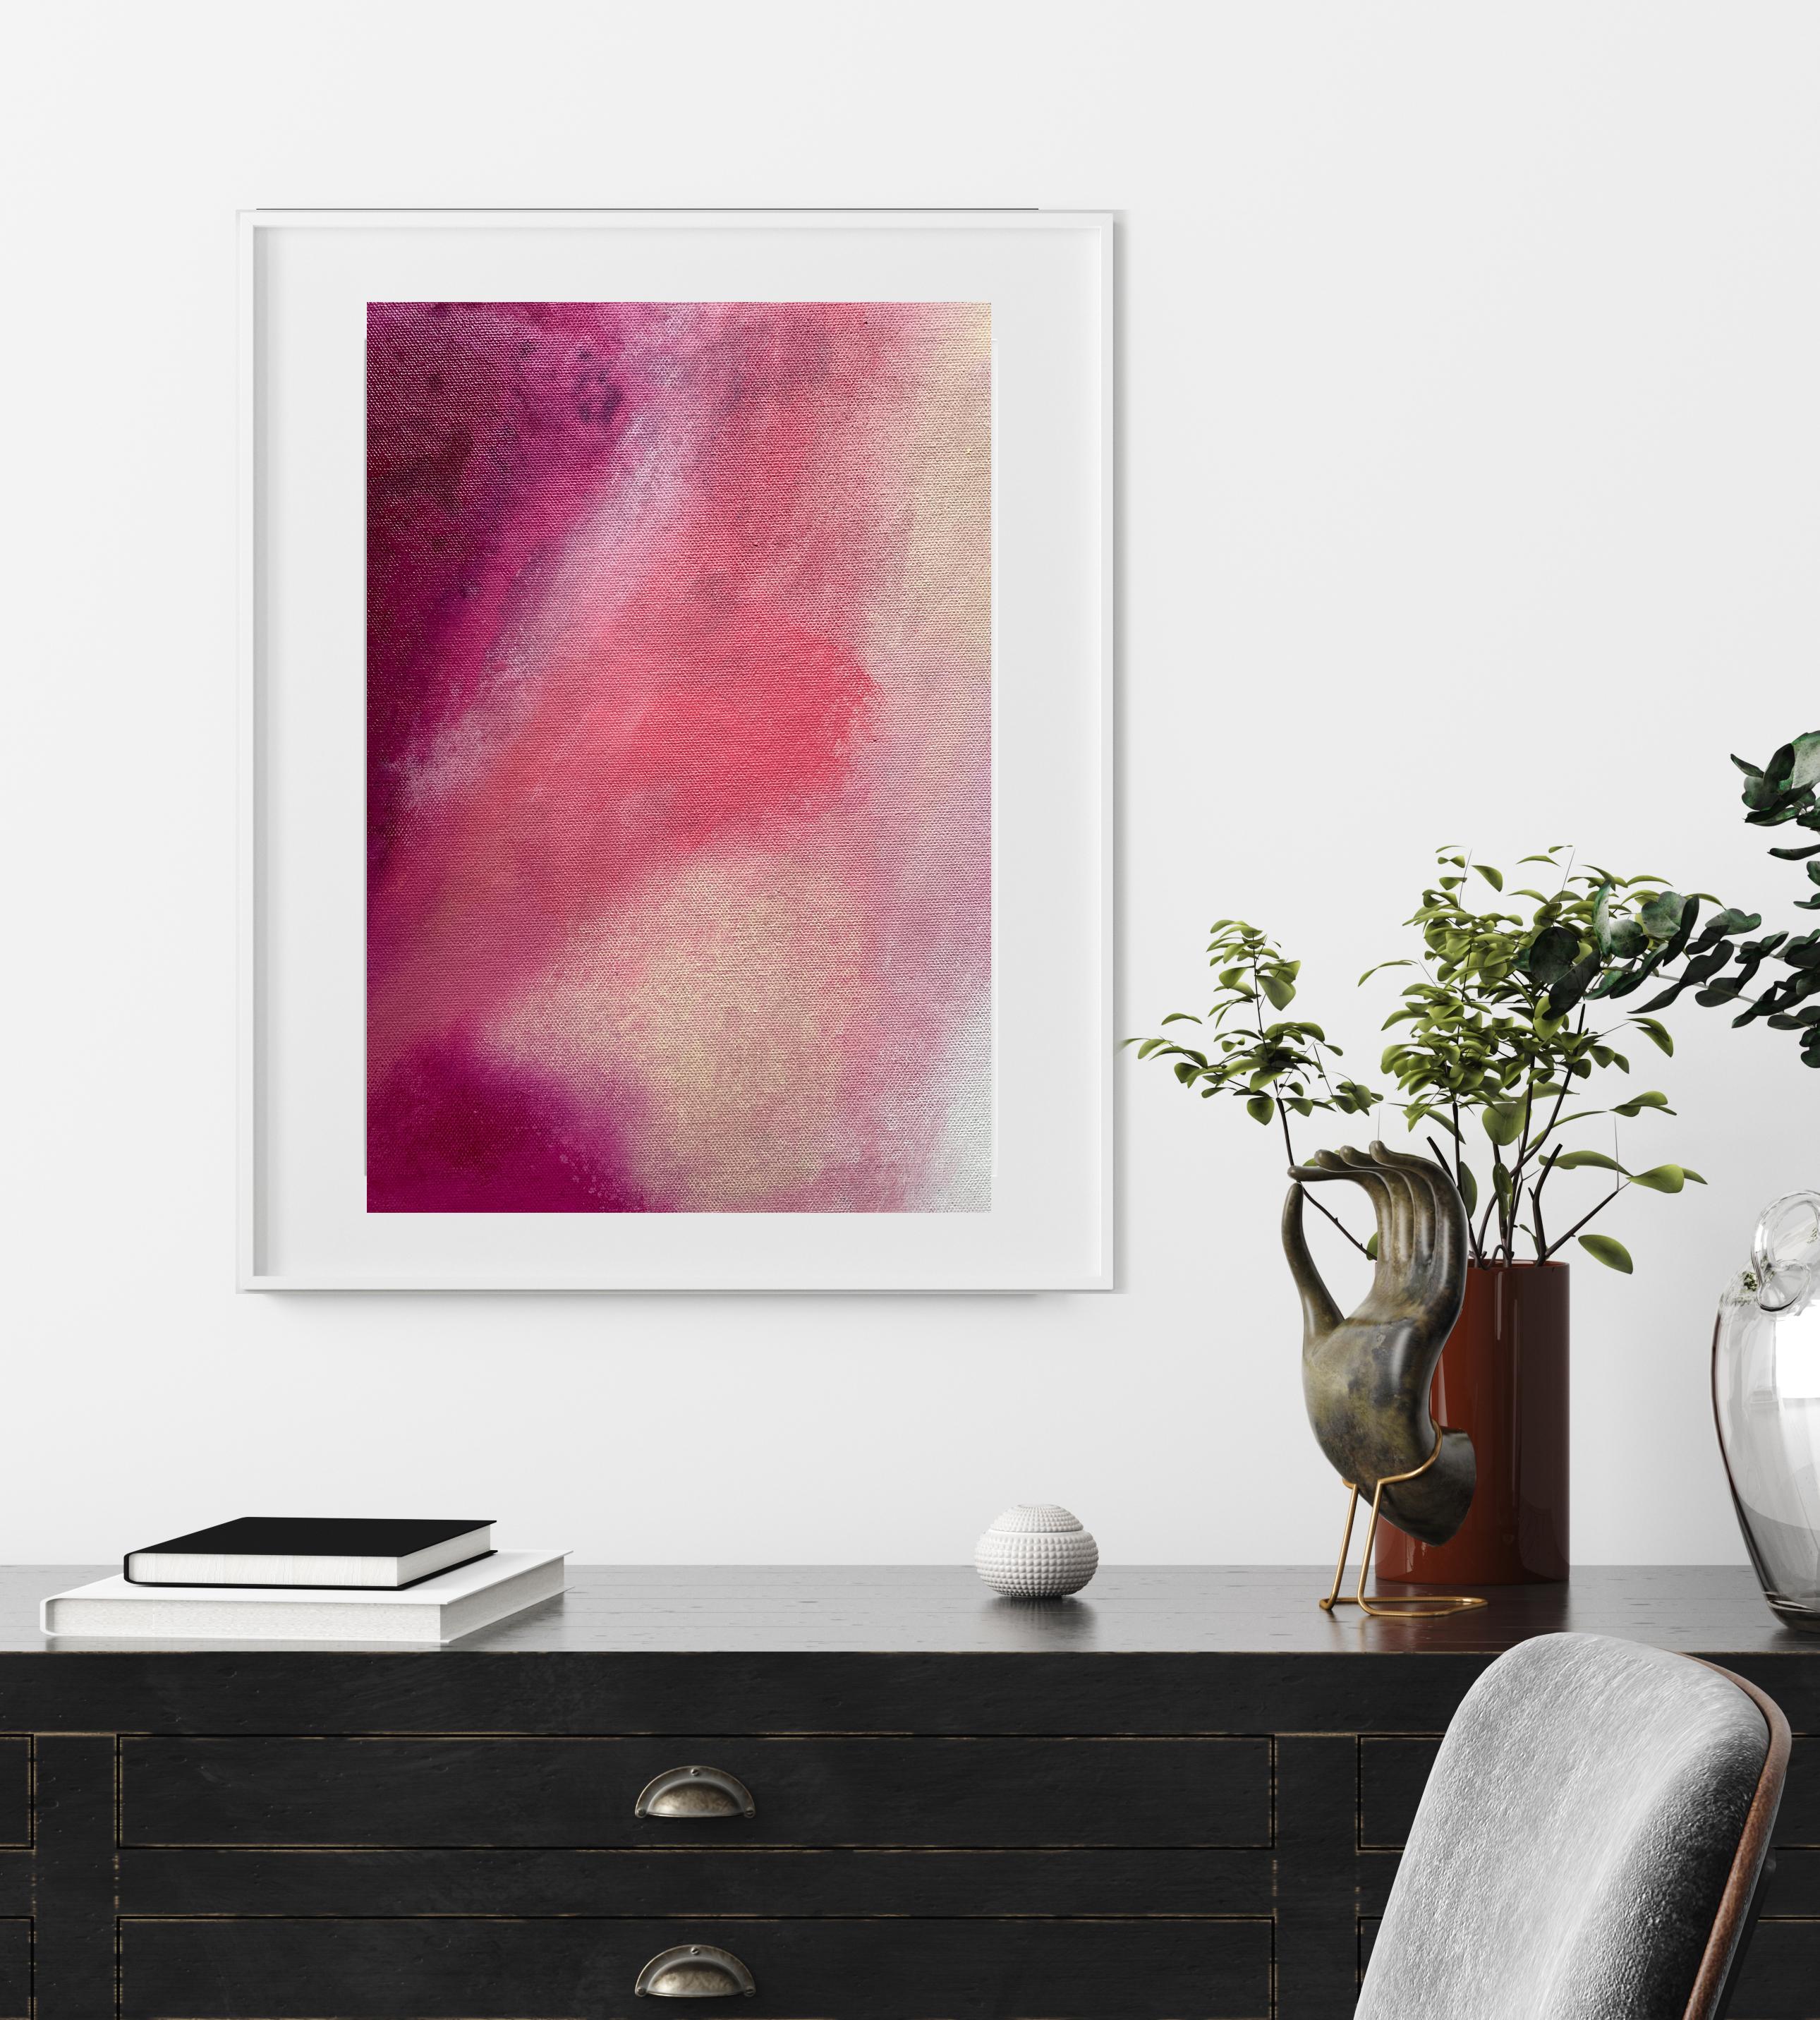 Gentle Blends Pink Peach no.1 small abstract expressionist on canvas rose red - Painting by Kathleen Rhee